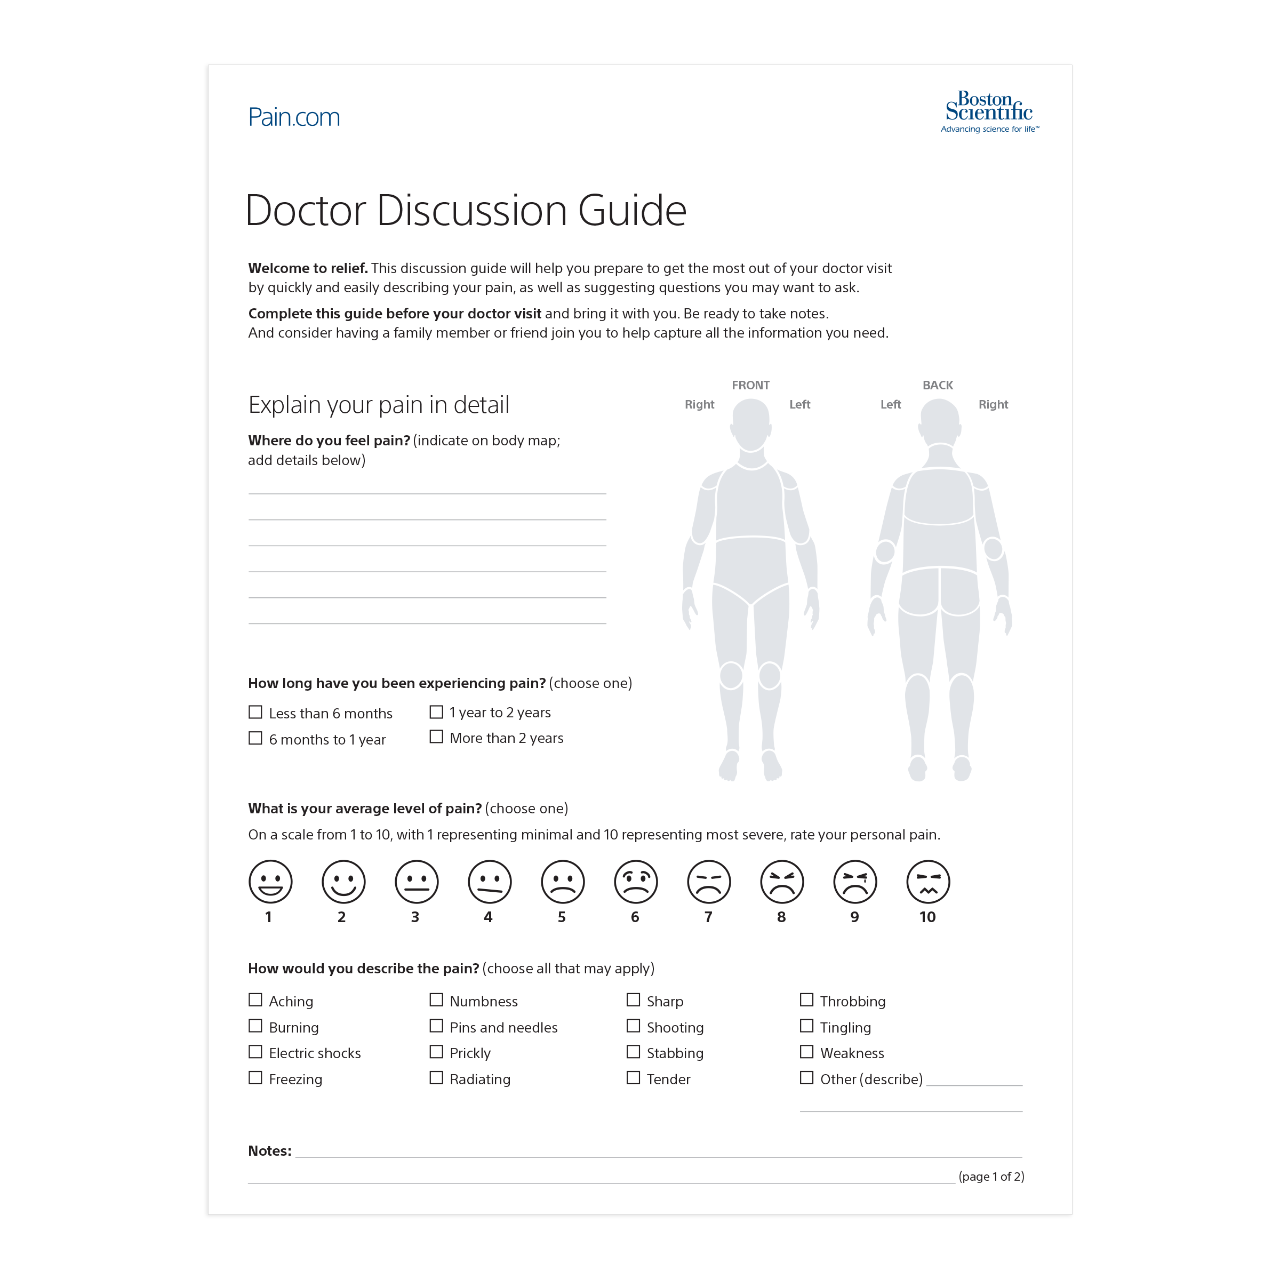 Form titled “Doctor Discussion Guide”.